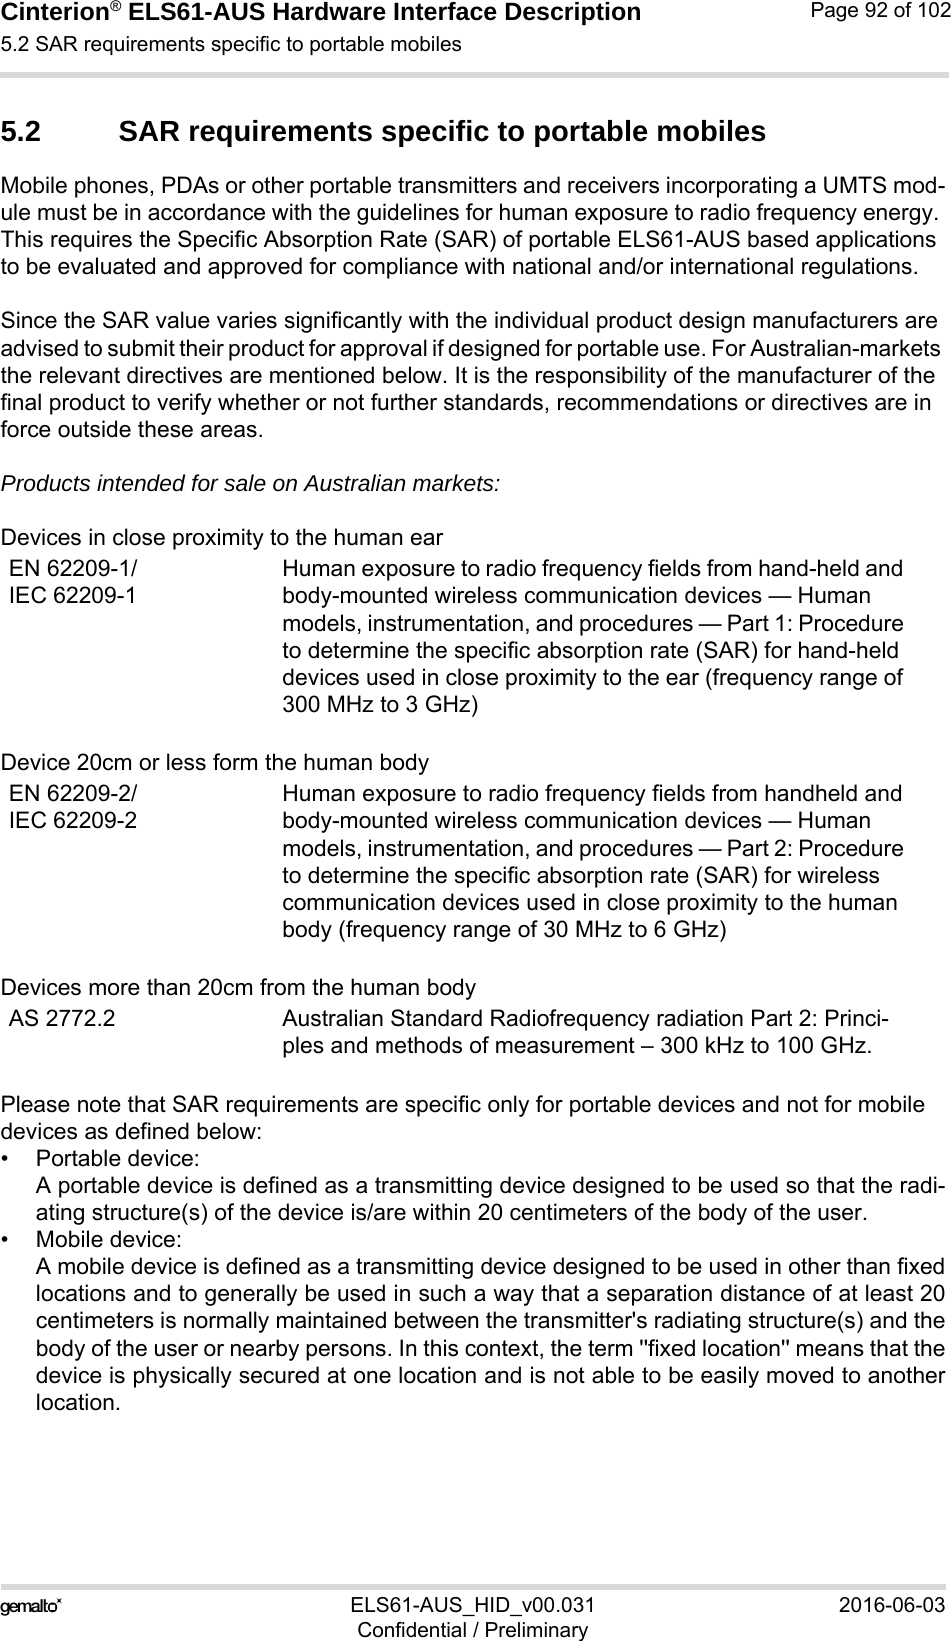 Cinterion® ELS61-AUS Hardware Interface Description5.2 SAR requirements specific to portable mobiles94ELS61-AUS_HID_v00.031 2016-06-03Confidential / PreliminaryPage 92 of 1025.2 SAR requirements specific to portable mobilesMobile phones, PDAs or other portable transmitters and receivers incorporating a UMTS mod-ule must be in accordance with the guidelines for human exposure to radio frequency energy. This requires the Specific Absorption Rate (SAR) of portable ELS61-AUS based applications to be evaluated and approved for compliance with national and/or international regulations. Since the SAR value varies significantly with the individual product design manufacturers are advised to submit their product for approval if designed for portable use. For Australian-markets the relevant directives are mentioned below. It is the responsibility of the manufacturer of the final product to verify whether or not further standards, recommendations or directives are in force outside these areas. Products intended for sale on Australian markets: Devices in close proximity to the human earDevice 20cm or less form the human bodyDevices more than 20cm from the human bodyPlease note that SAR requirements are specific only for portable devices and not for mobile devices as defined below:• Portable device:A portable device is defined as a transmitting device designed to be used so that the radi-ating structure(s) of the device is/are within 20 centimeters of the body of the user.• Mobile device:A mobile device is defined as a transmitting device designed to be used in other than fixedlocations and to generally be used in such a way that a separation distance of at least 20centimeters is normally maintained between the transmitter&apos;s radiating structure(s) and thebody of the user or nearby persons. In this context, the term &apos;&apos;fixed location&apos;&apos; means that thedevice is physically secured at one location and is not able to be easily moved to anotherlocation.EN 62209-1/IEC 62209-1Human exposure to radio frequency fields from hand-held and body-mounted wireless communication devices — Human models, instrumentation, and procedures — Part 1: Procedure to determine the specific absorption rate (SAR) for hand-held devices used in close proximity to the ear (frequency range of 300 MHz to 3 GHz)EN 62209-2/IEC 62209-2Human exposure to radio frequency fields from handheld and body-mounted wireless communication devices — Human models, instrumentation, and procedures — Part 2: Procedure to determine the specific absorption rate (SAR) for wireless communication devices used in close proximity to the human body (frequency range of 30 MHz to 6 GHz)AS 2772.2 Australian Standard Radiofrequency radiation Part 2: Princi-ples and methods of measurement – 300 kHz to 100 GHz.